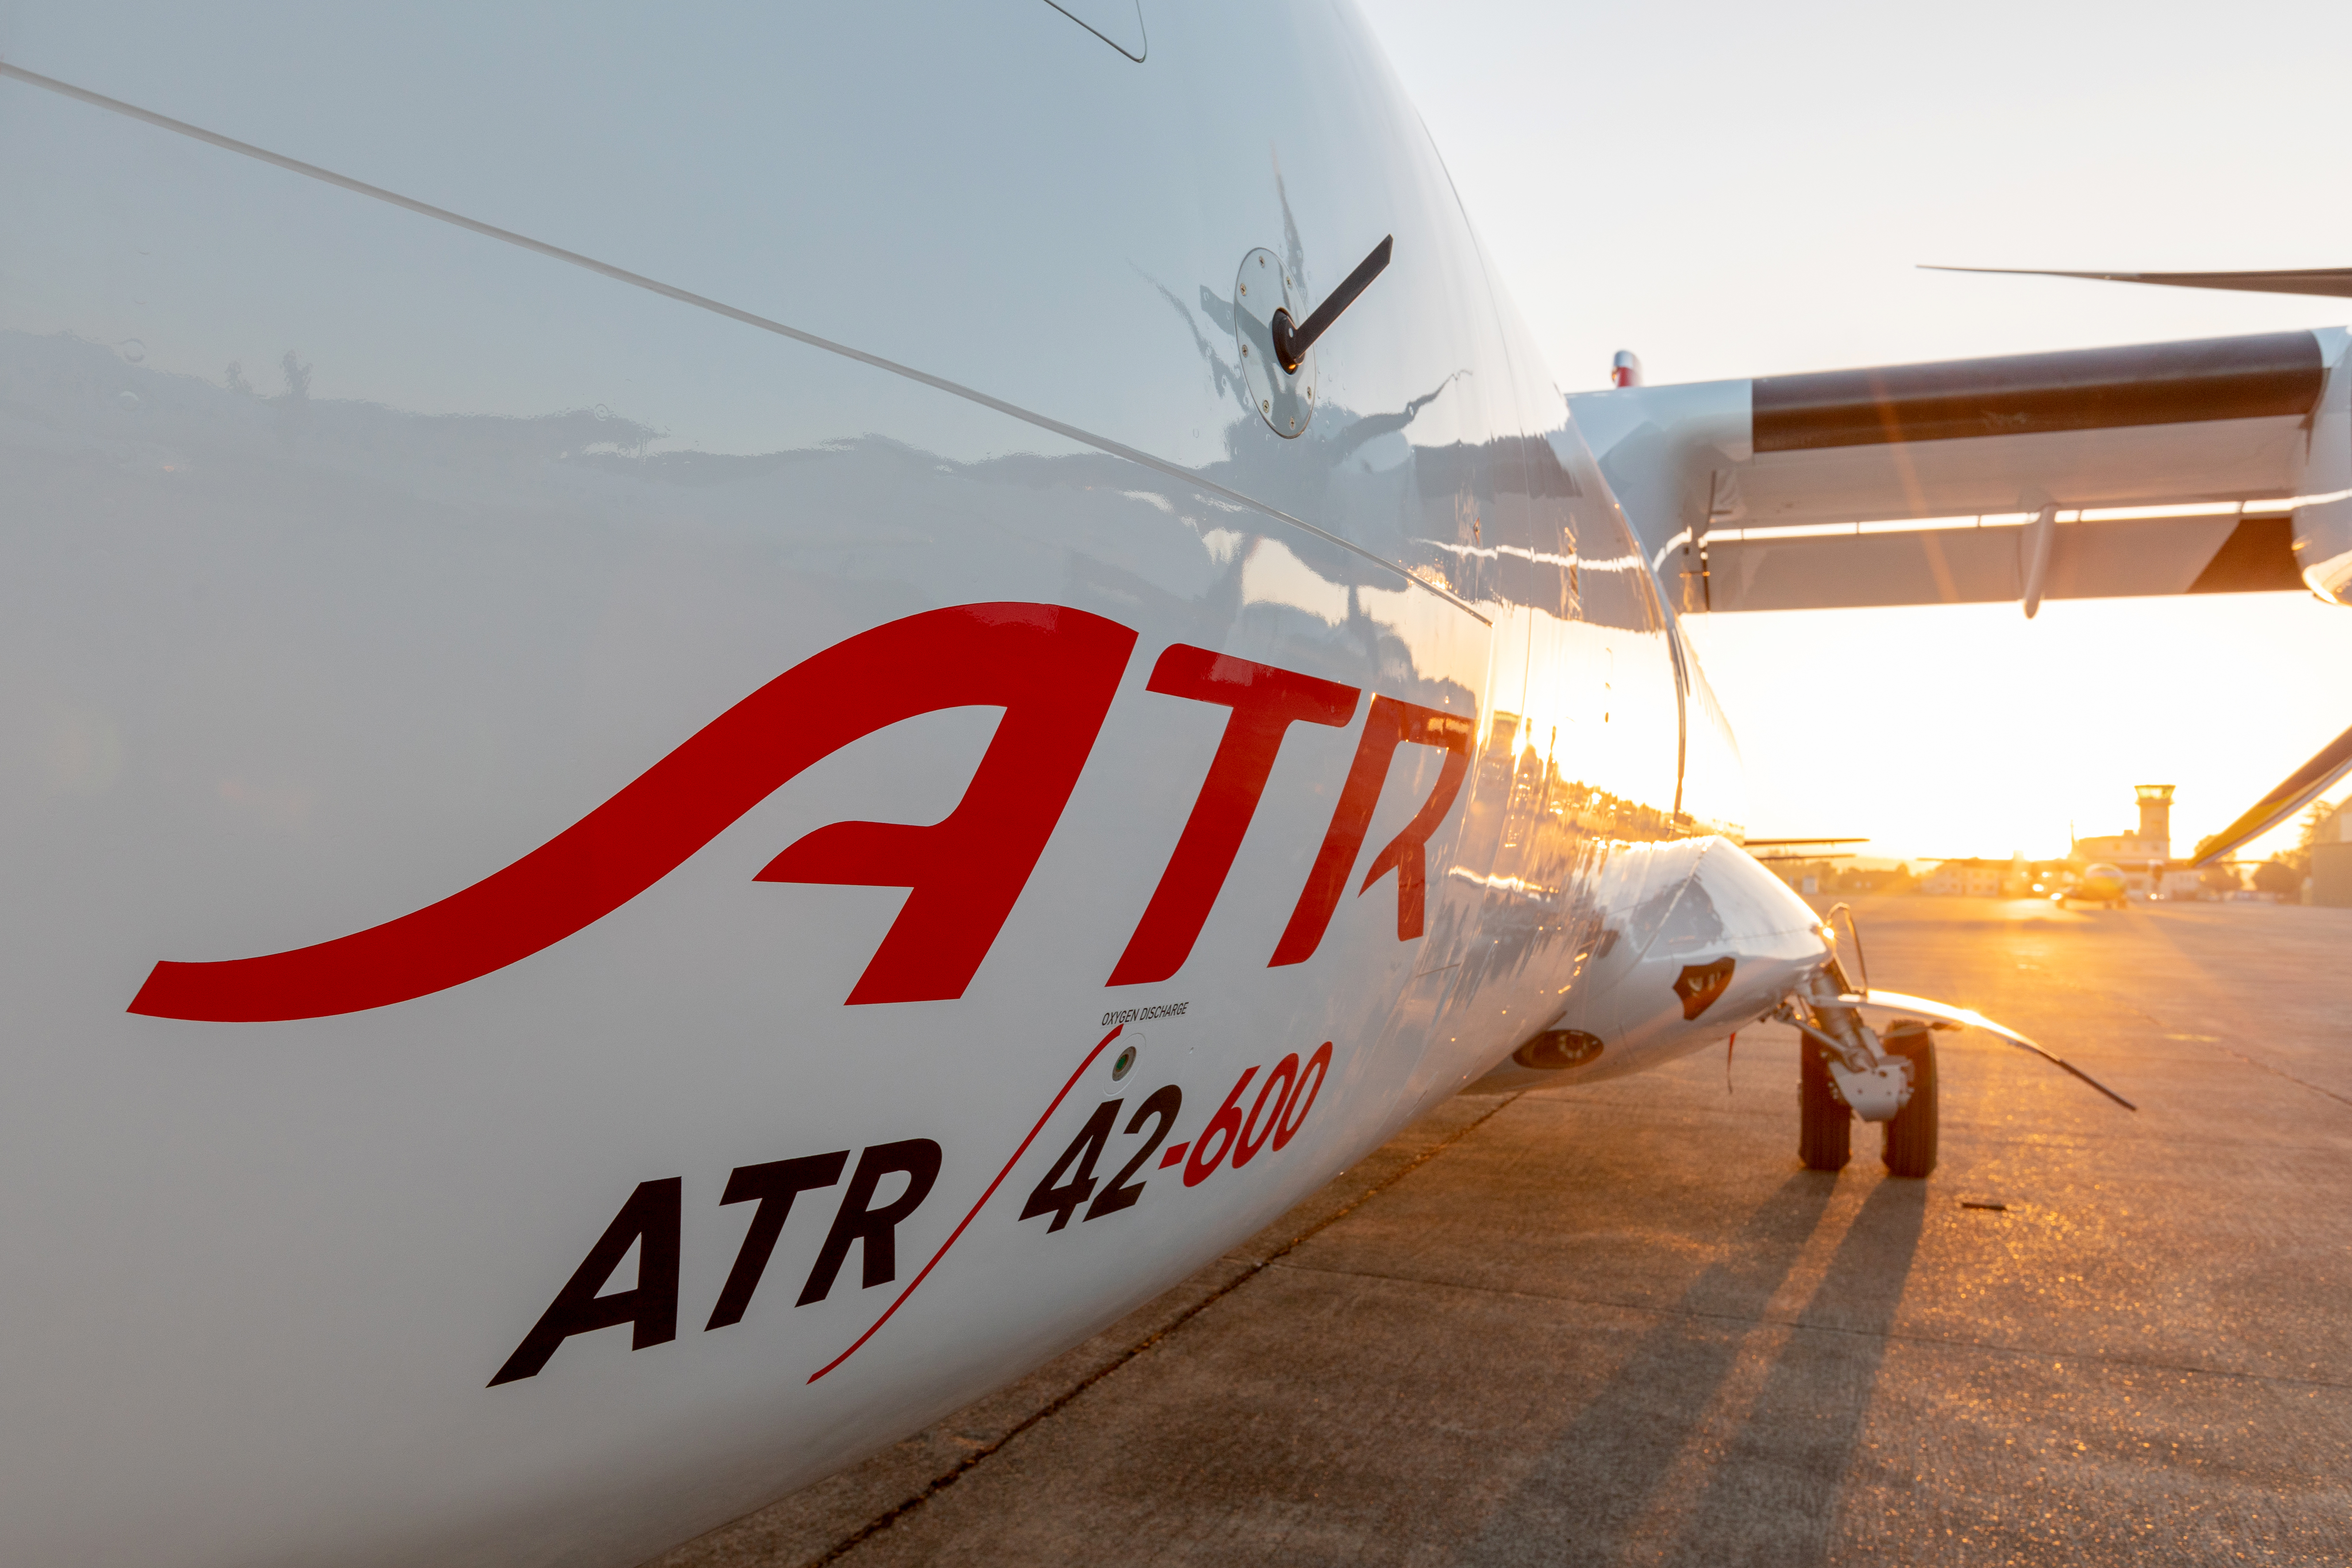 ATR secures Chinese certification approval and firm order